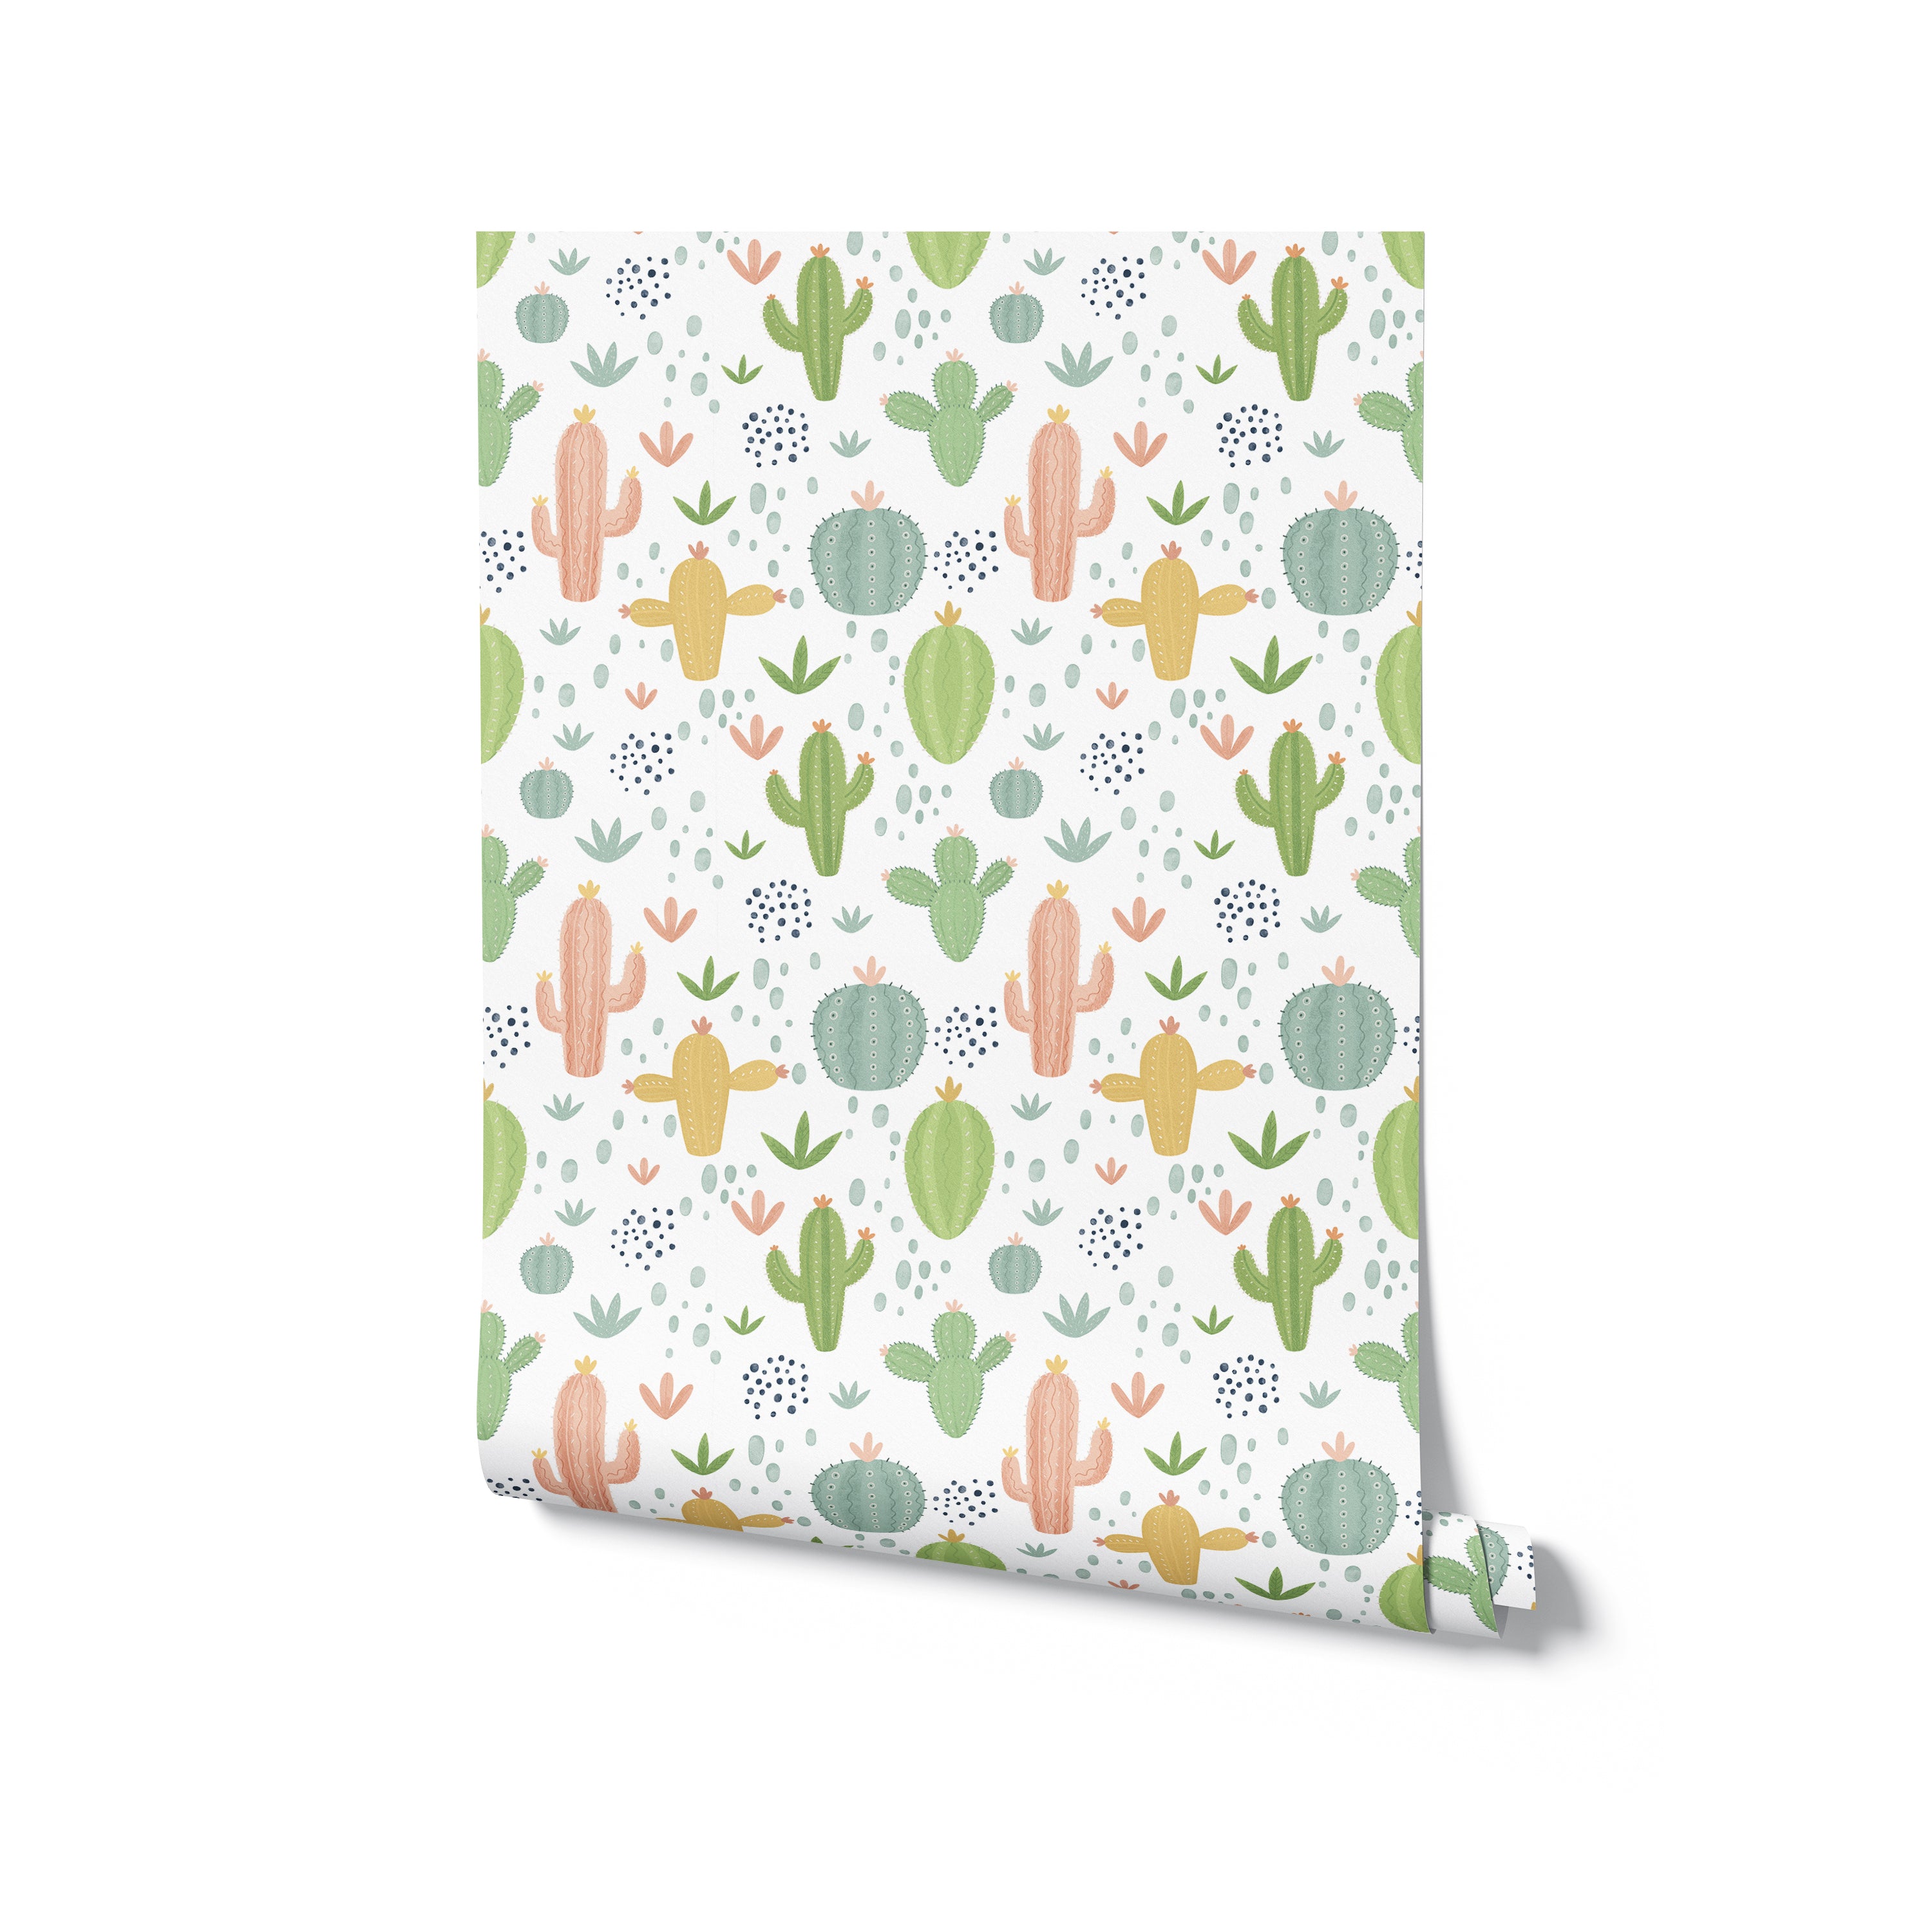 A roll of 'Colourful Cactus Kids Wallpaper' showcasing diverse cactus species in an array of green and soft pastel tones with tiny orange and yellow flowers, ideal for creating a lively and engaging environment in nurseries or playrooms.